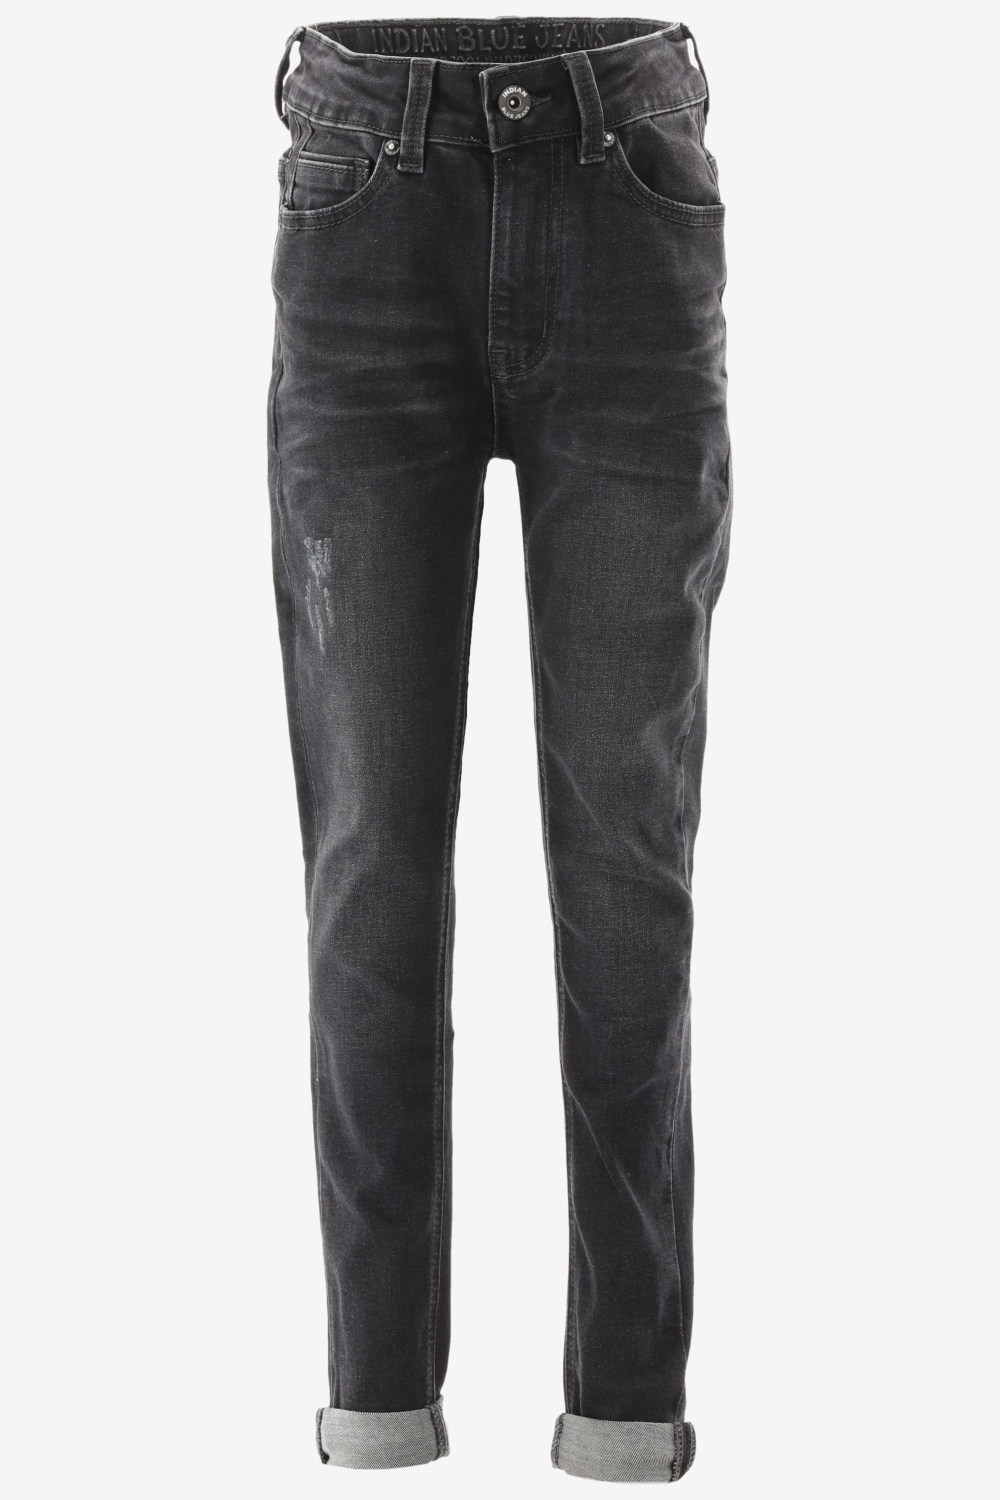 Indian Blue Jeans Black Jay Tapered Fit Jeans - Zwart